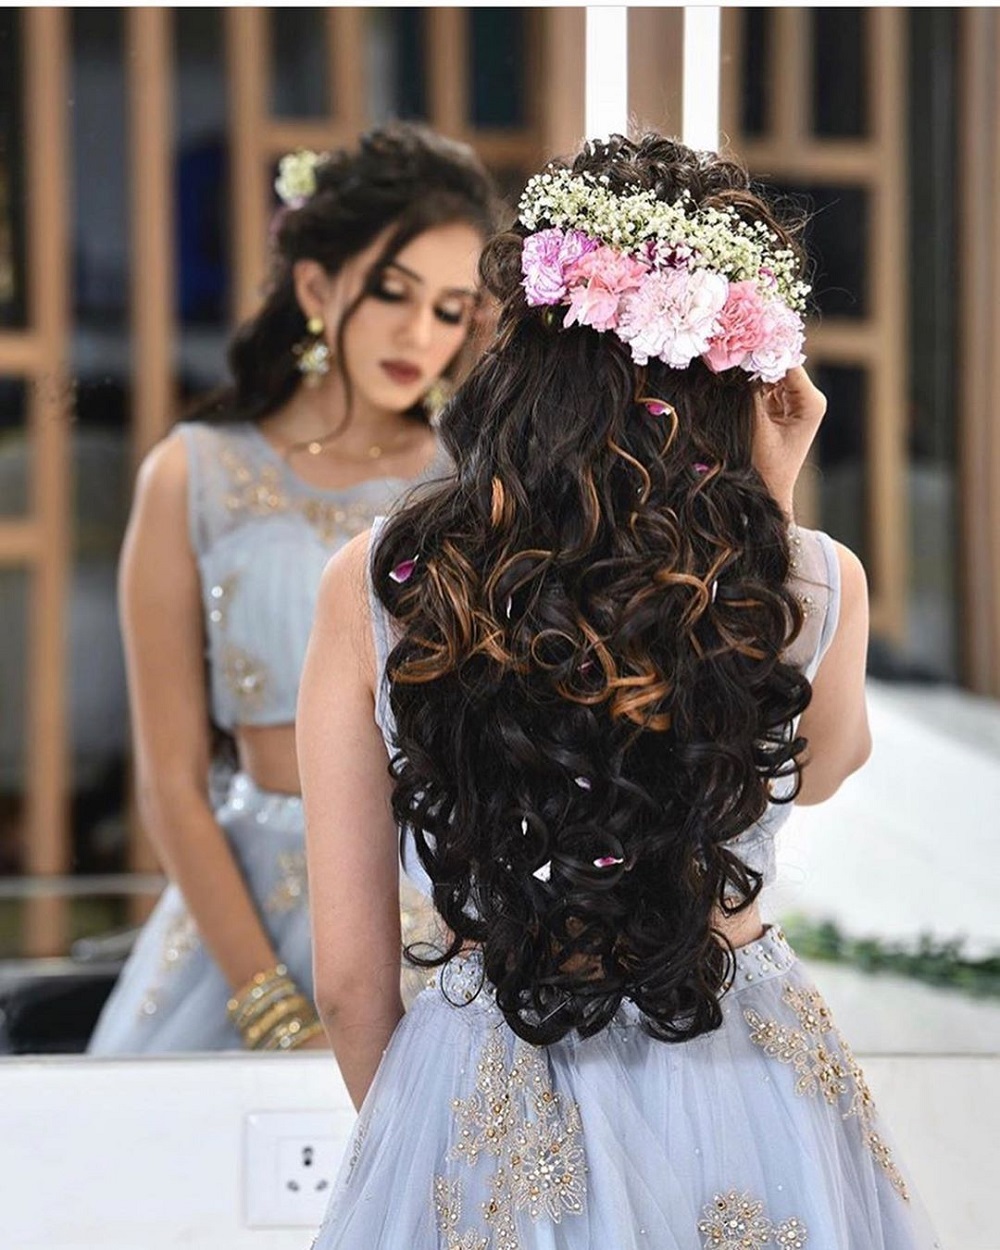 Elegant Bride with Ball Gown Dress Tiara and Down Hairstyle